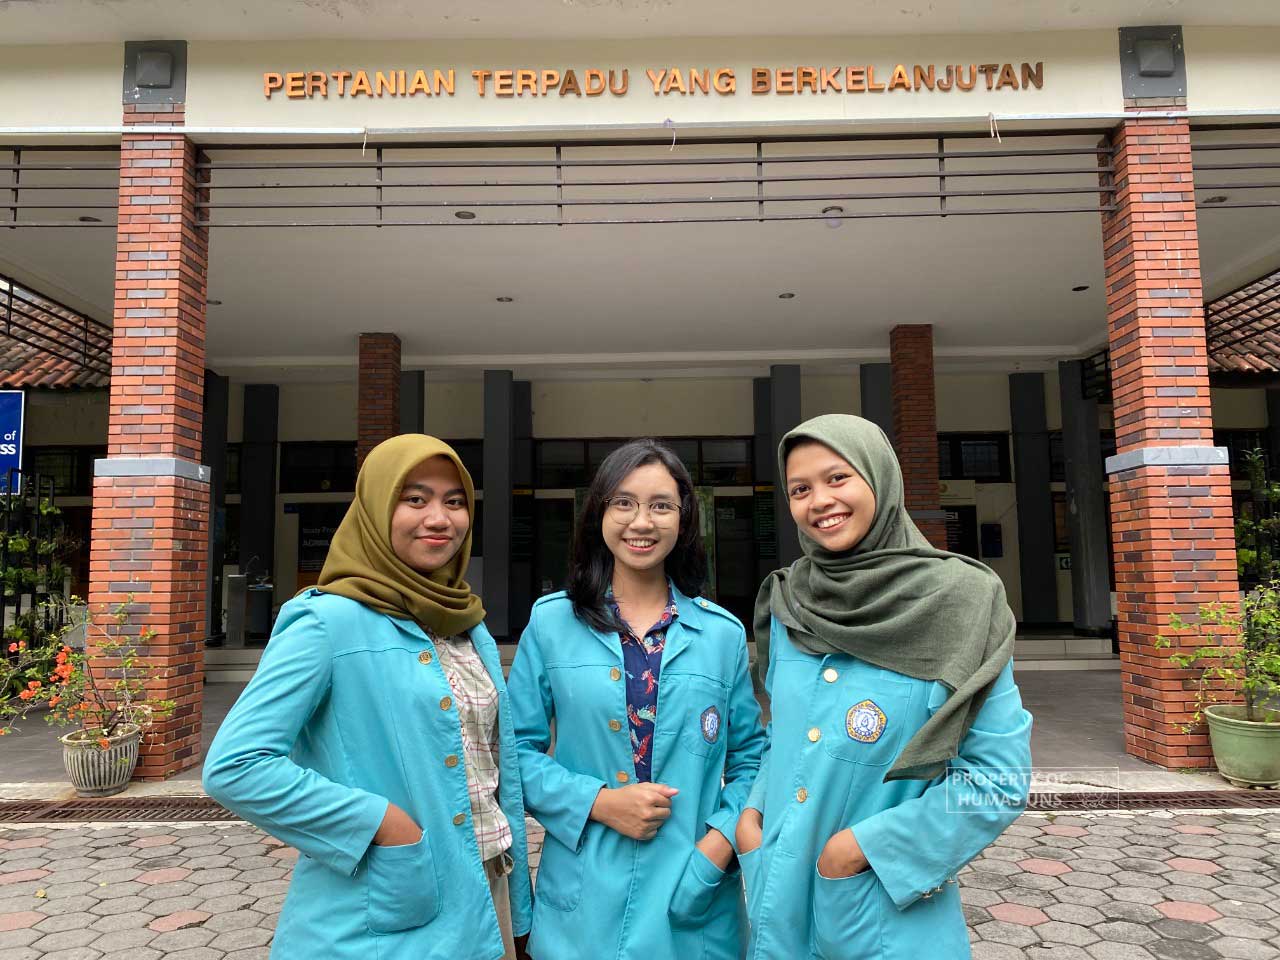 Single-Use Soap: UNS Student Team Won 2nd Place in Enotech 2021 Business Plan Competition